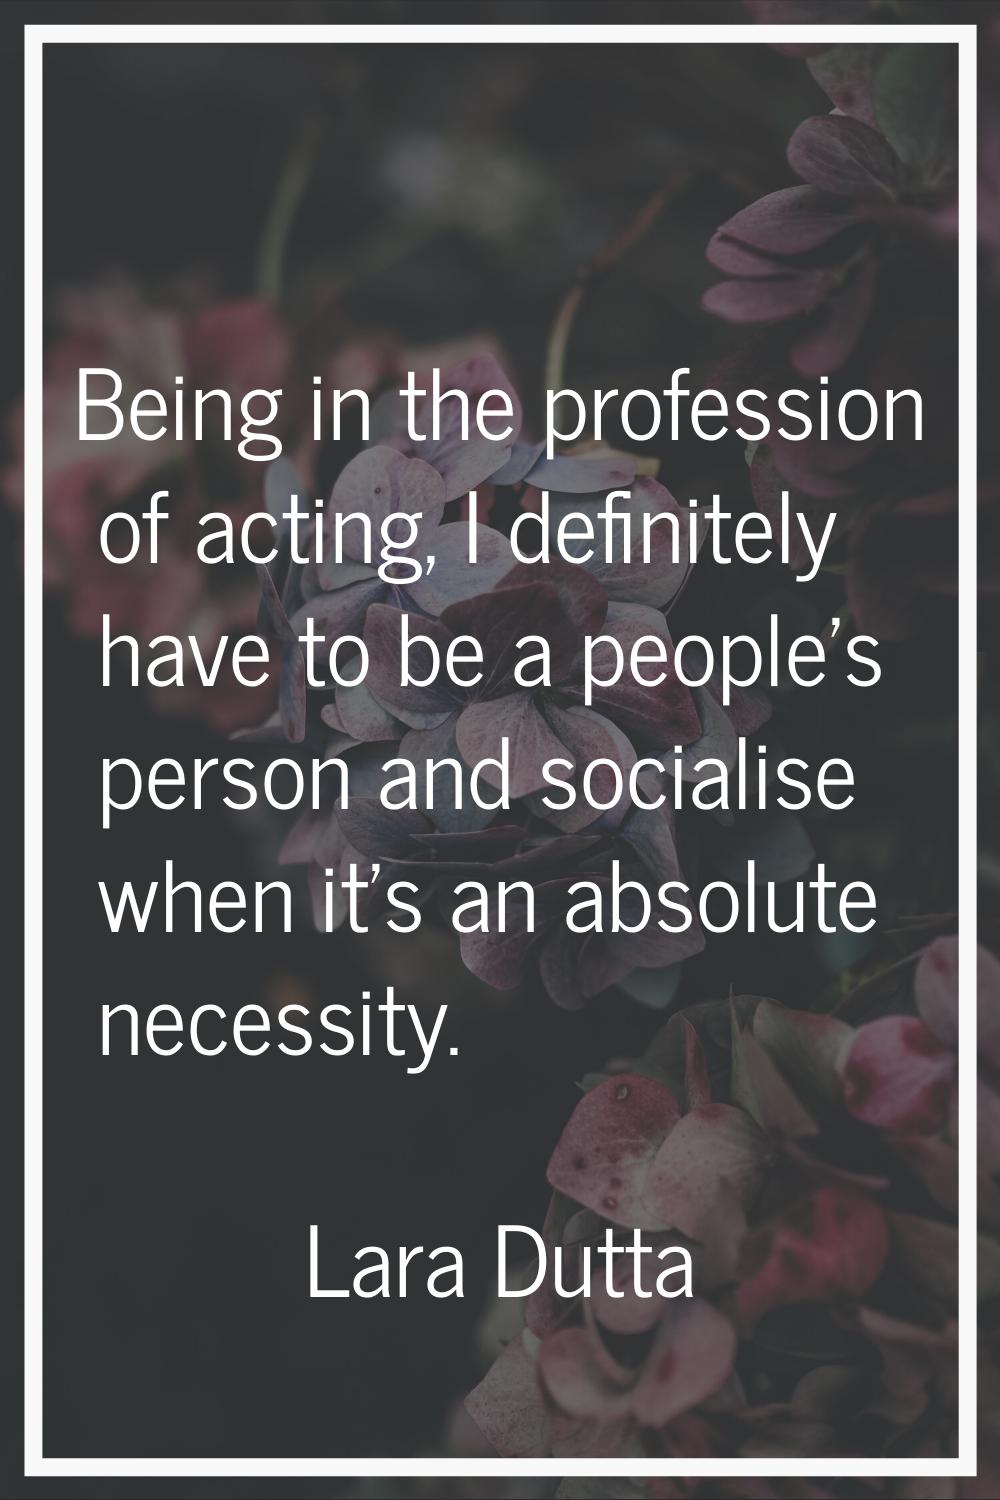 Being in the profession of acting, I definitely have to be a people's person and socialise when it'